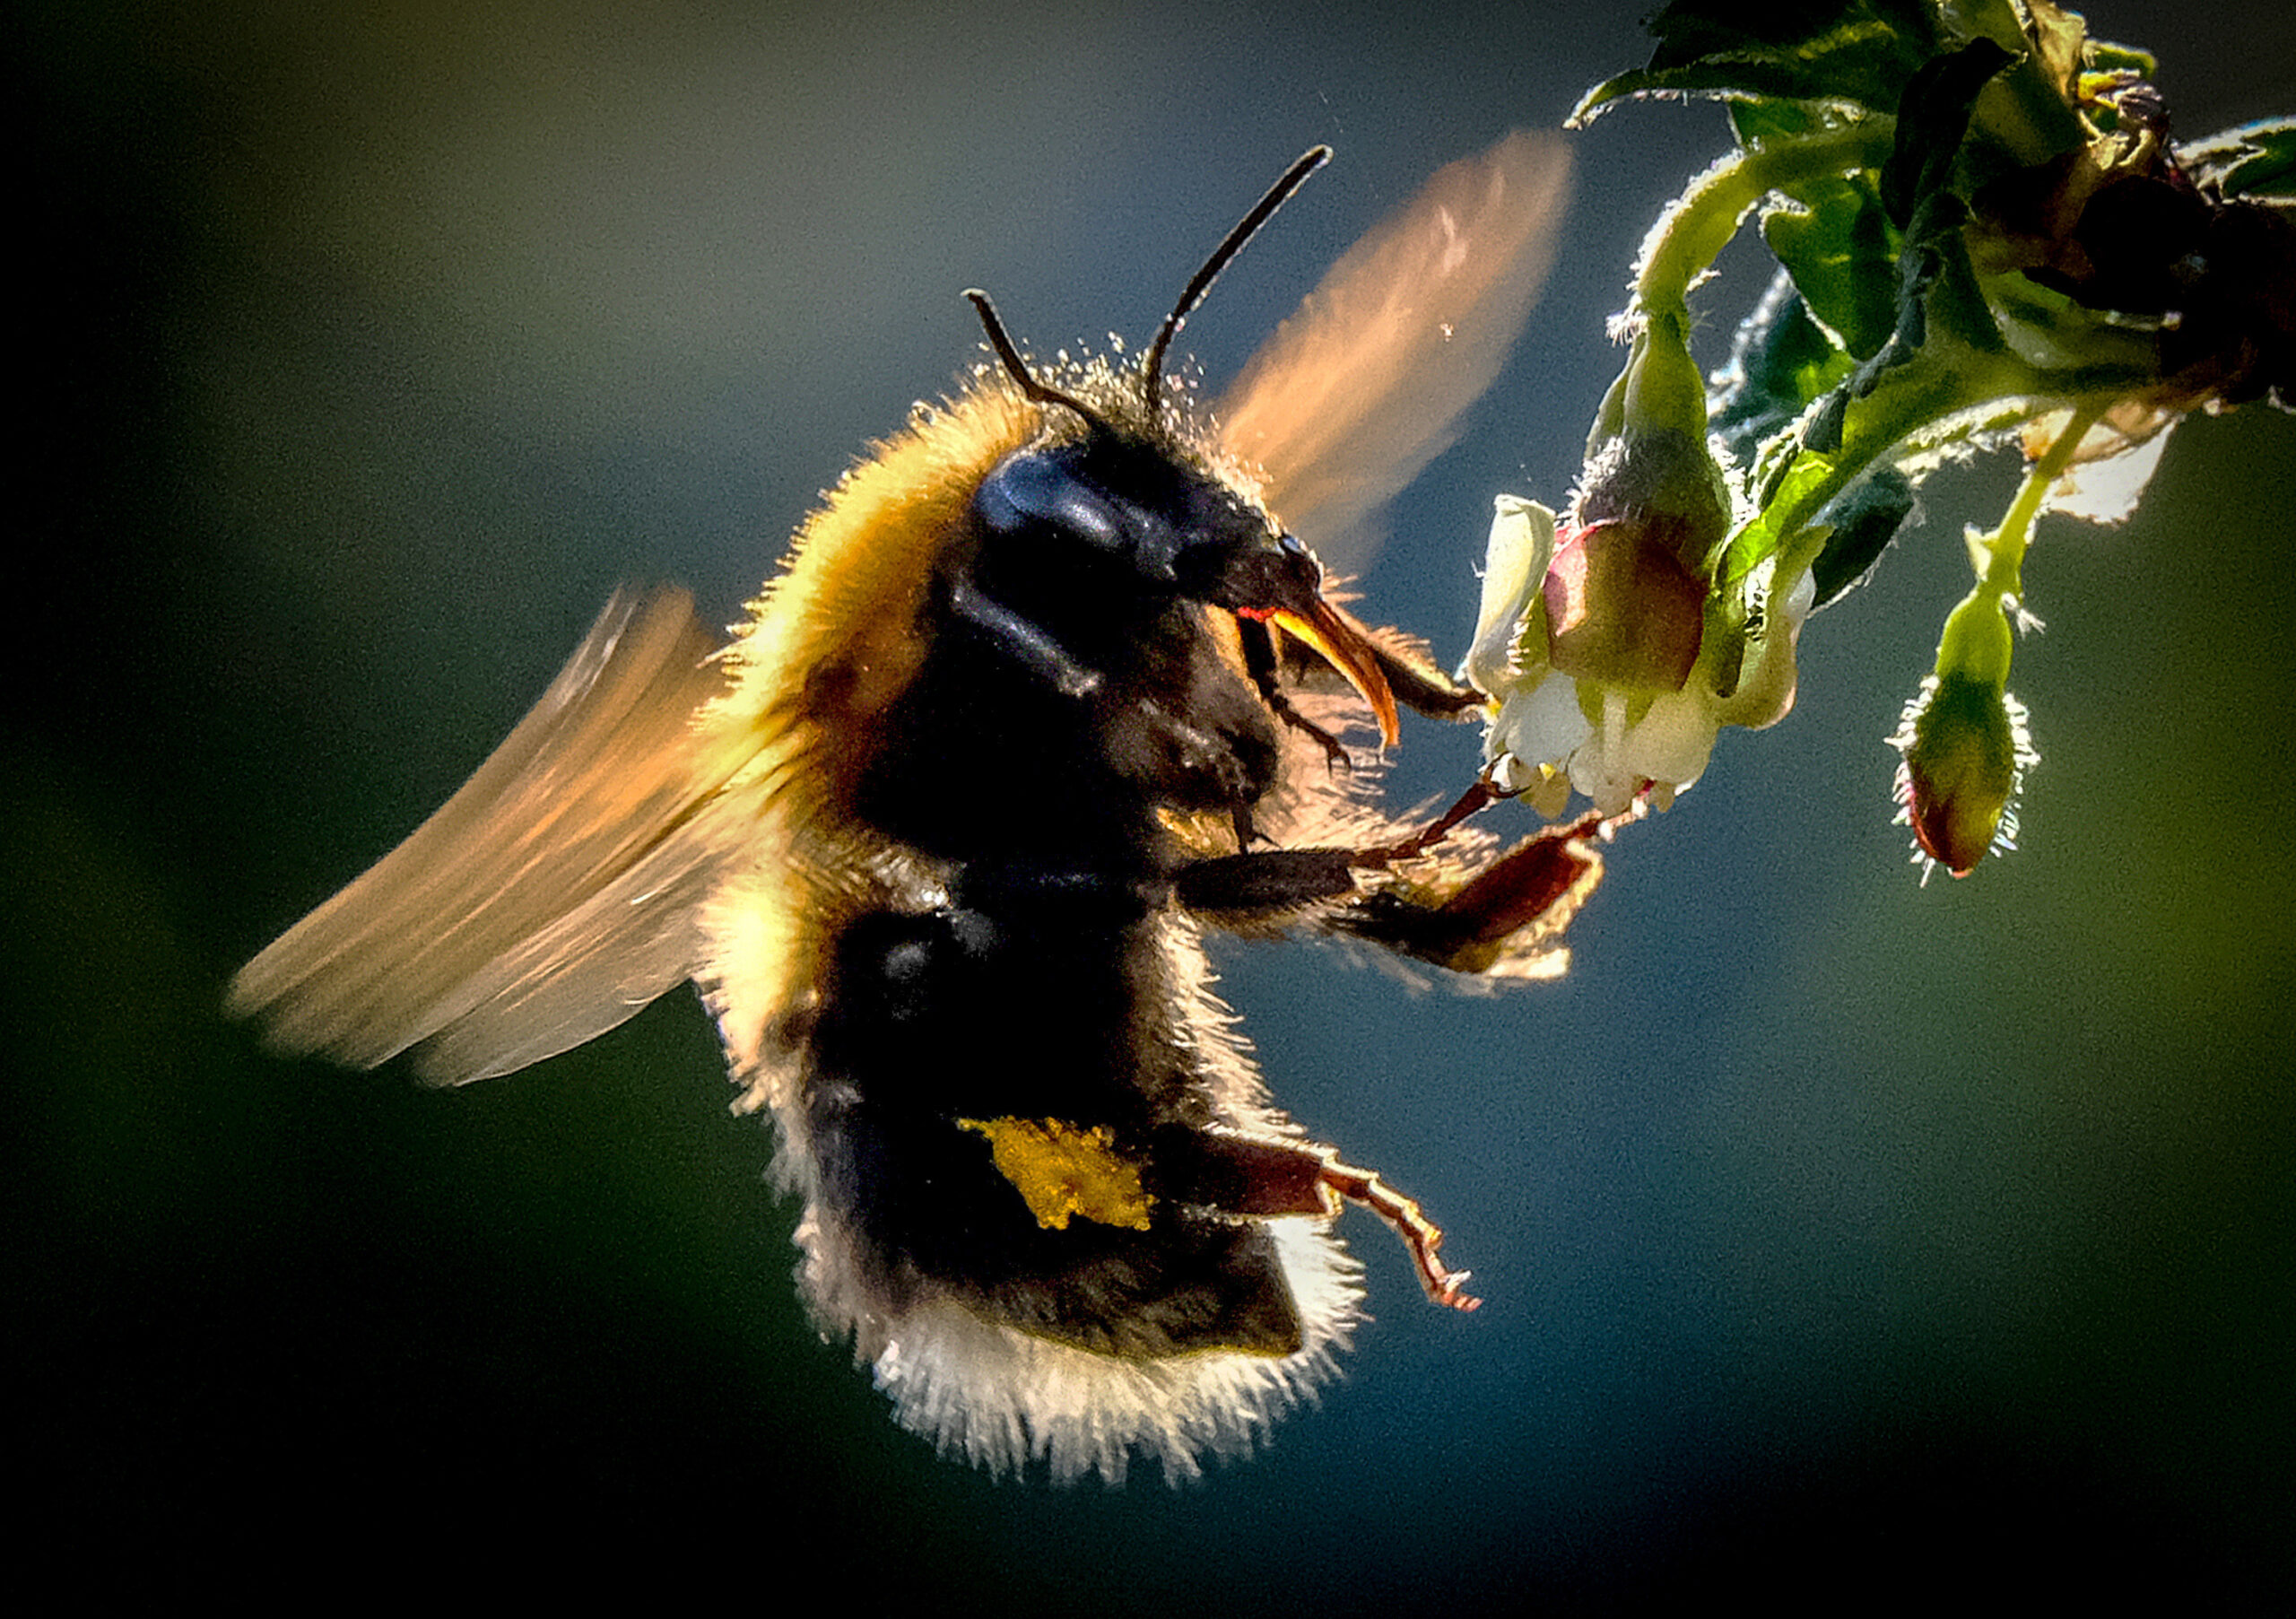 Did Albert Einstein predict that if something eliminated bees from our planet, mankind would perish within 4 years?